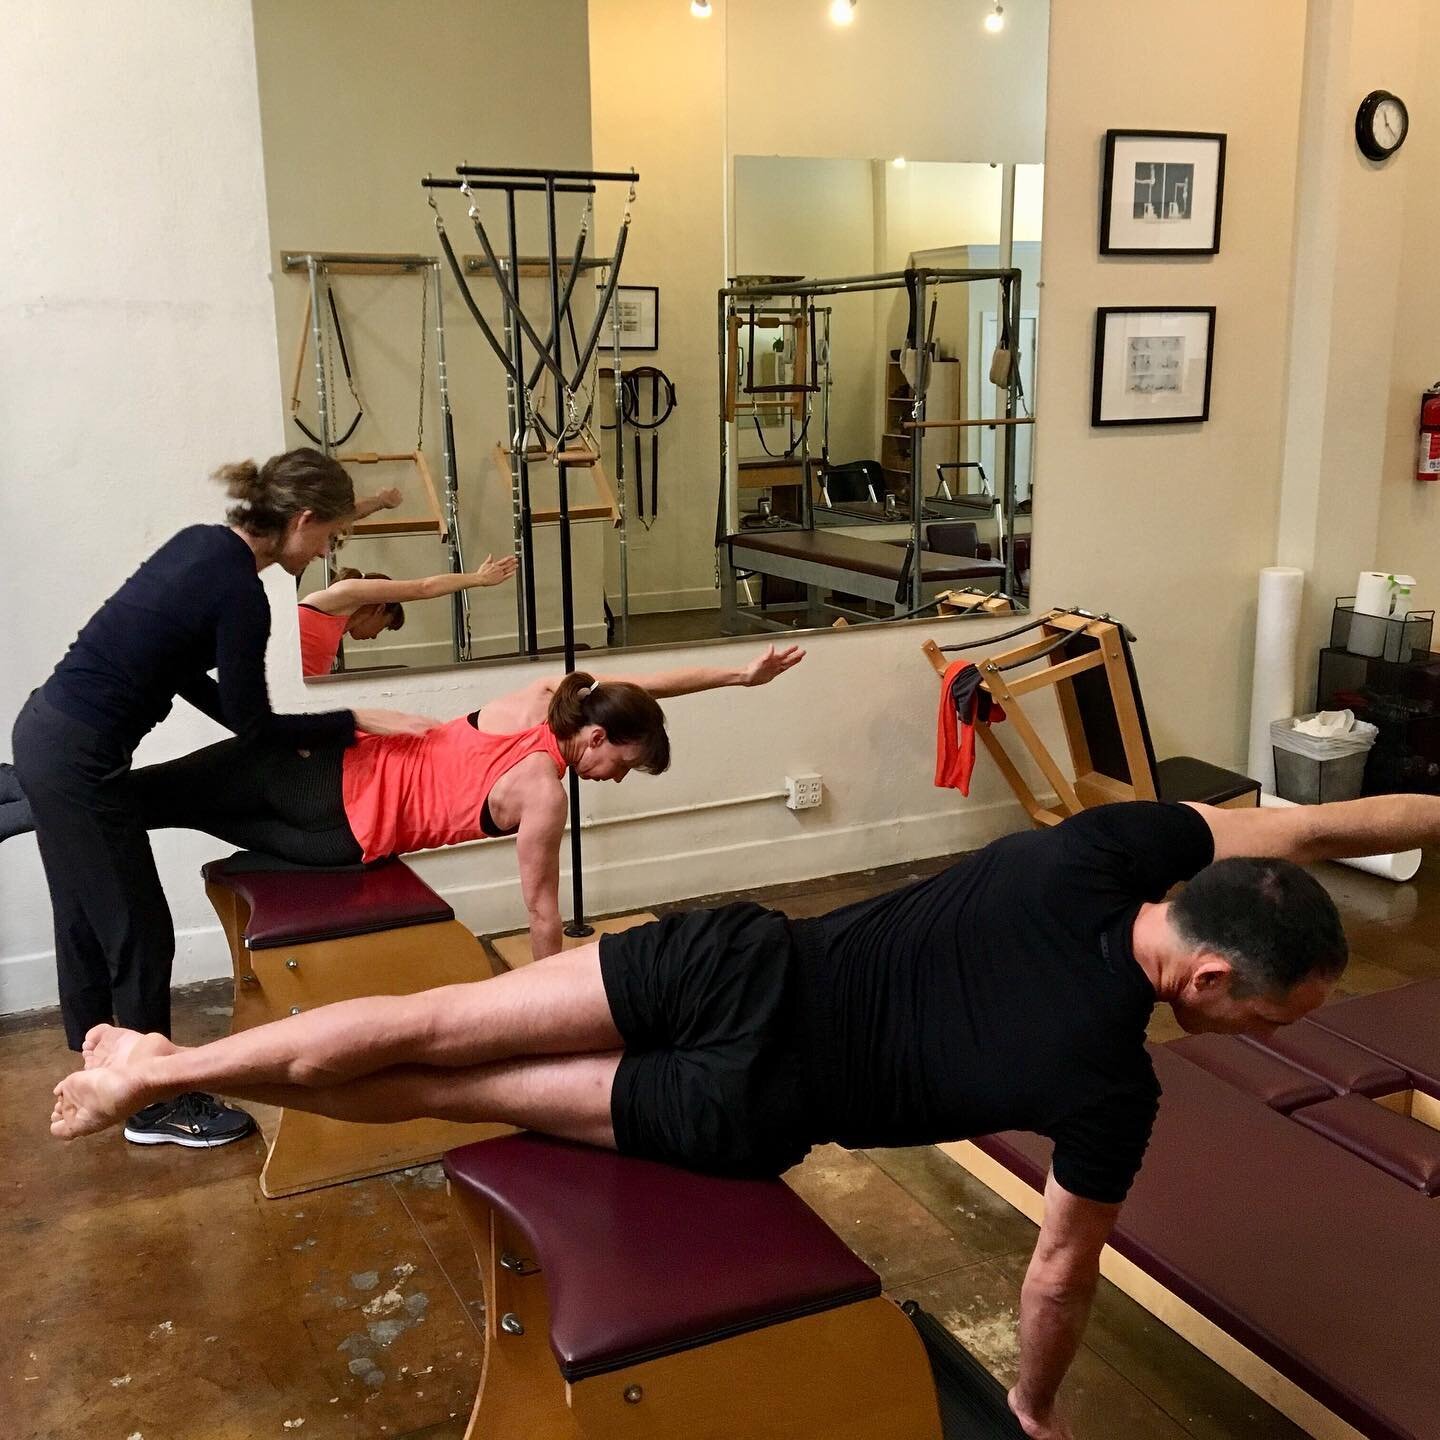 Missing days like these, but excited to teach VIRTUAL WUNDA CHAIR Tue 10/27 @ 10am pacific time. Can&rsquo;t join live? Recording available! DM for zoom link.  #zoompilates #wundachair #pilatesonline #zoepilates #gratzpilates #teamgratz